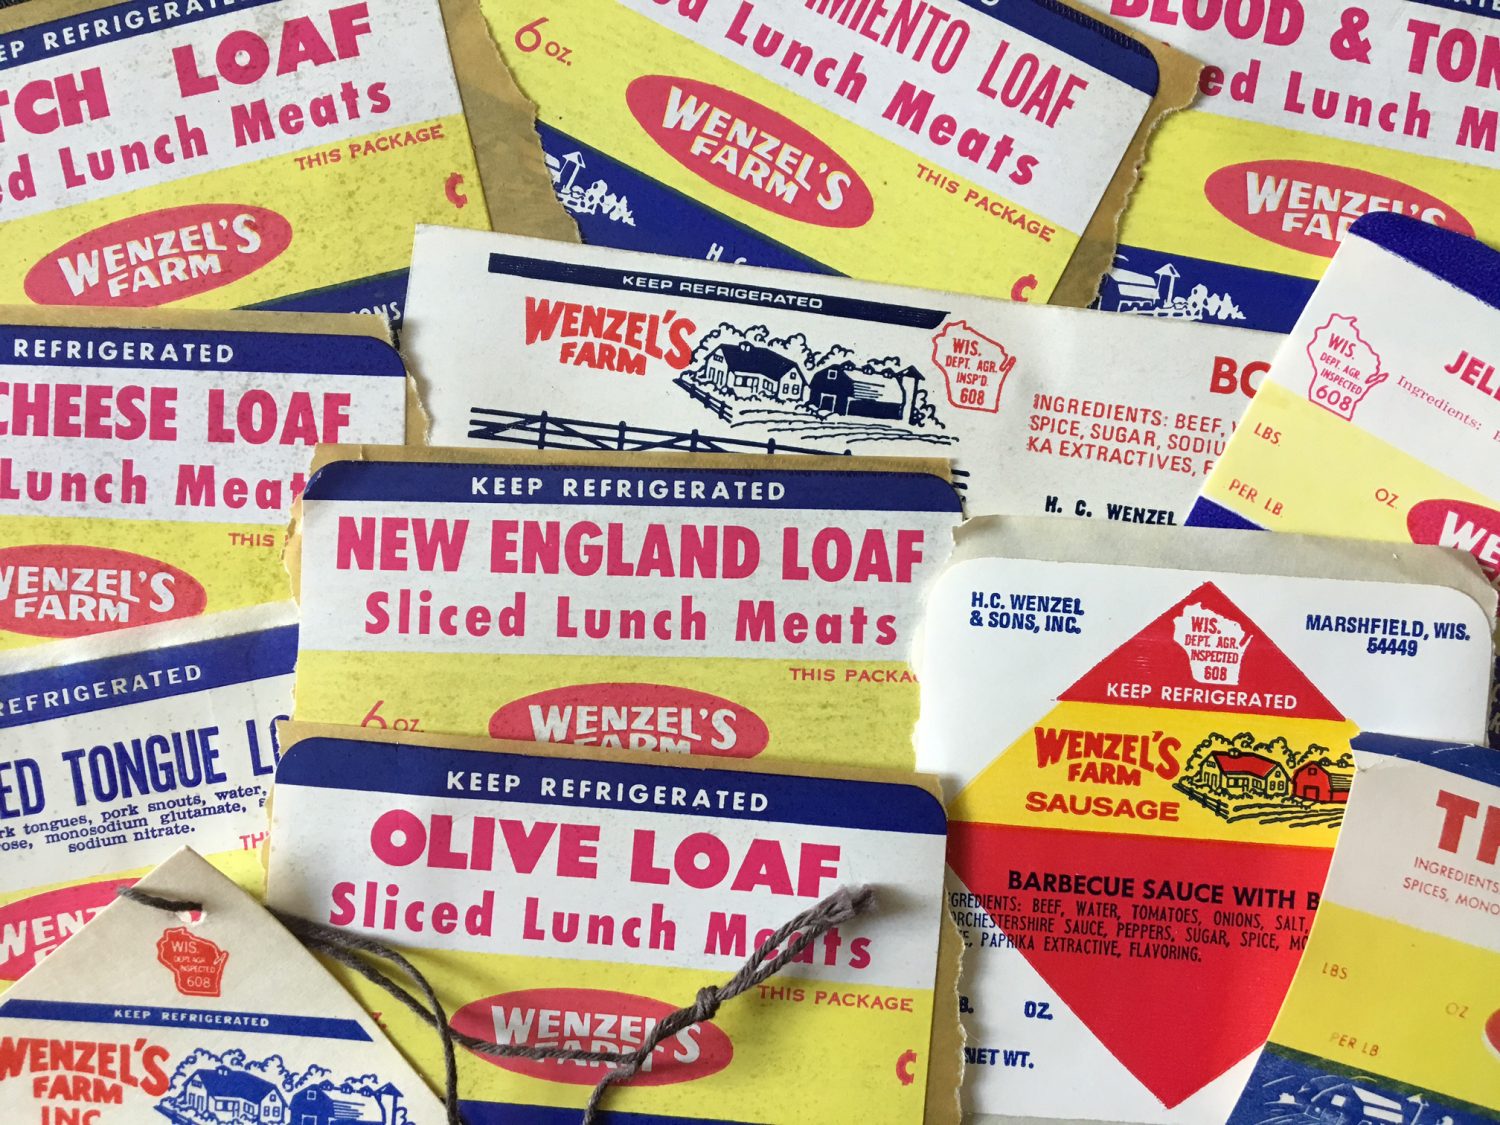 Wenzel's Farm products have greatly changed through the years. Pictured are a few labels from sausage items that have come and gone.